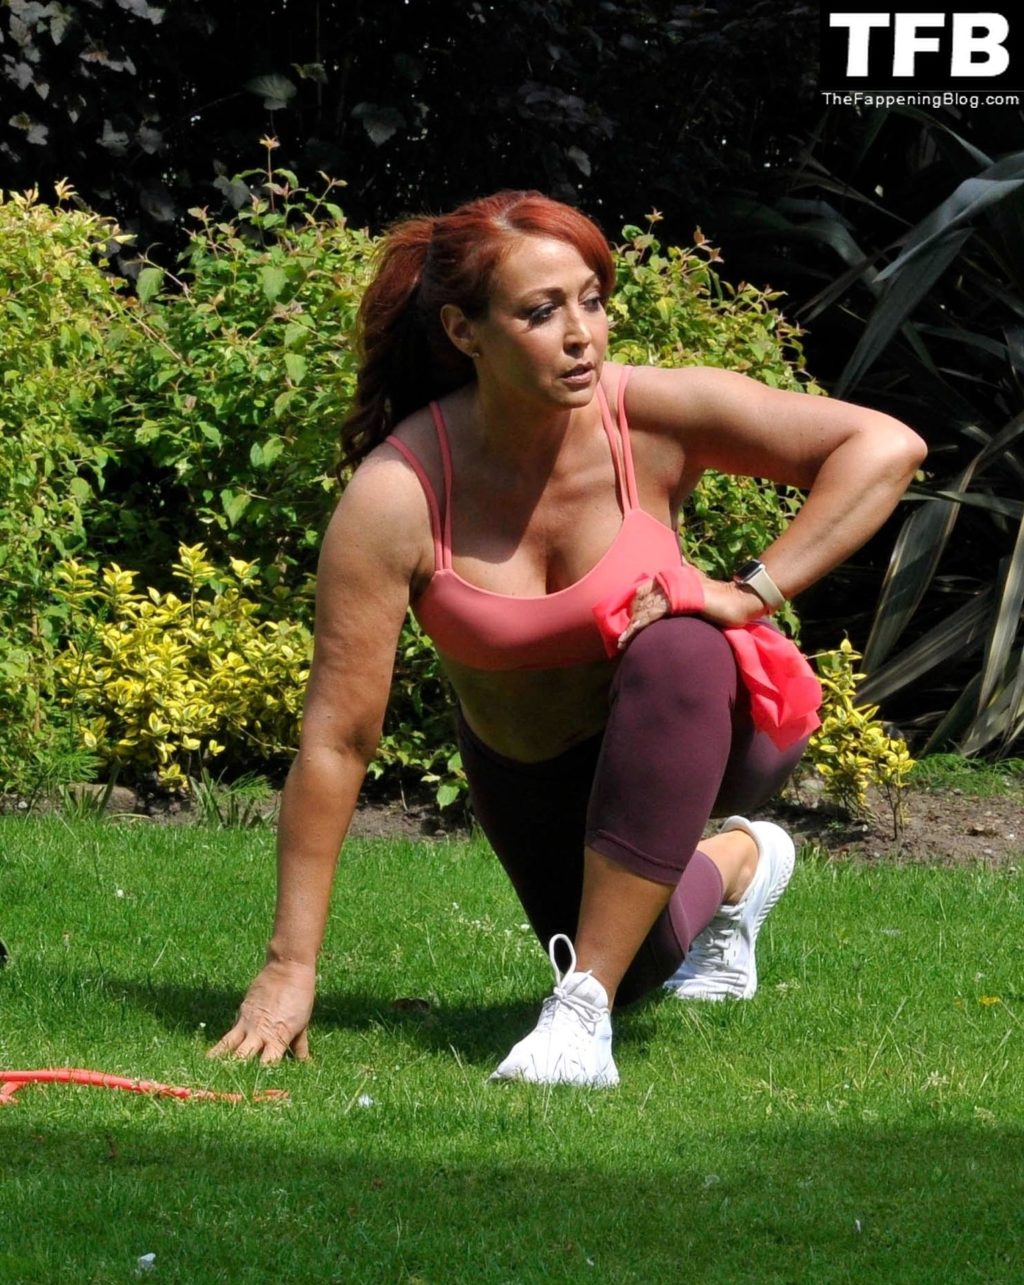 Amy Anzel Puts on a Busty Display During Outdoor Workout (14 Photos)